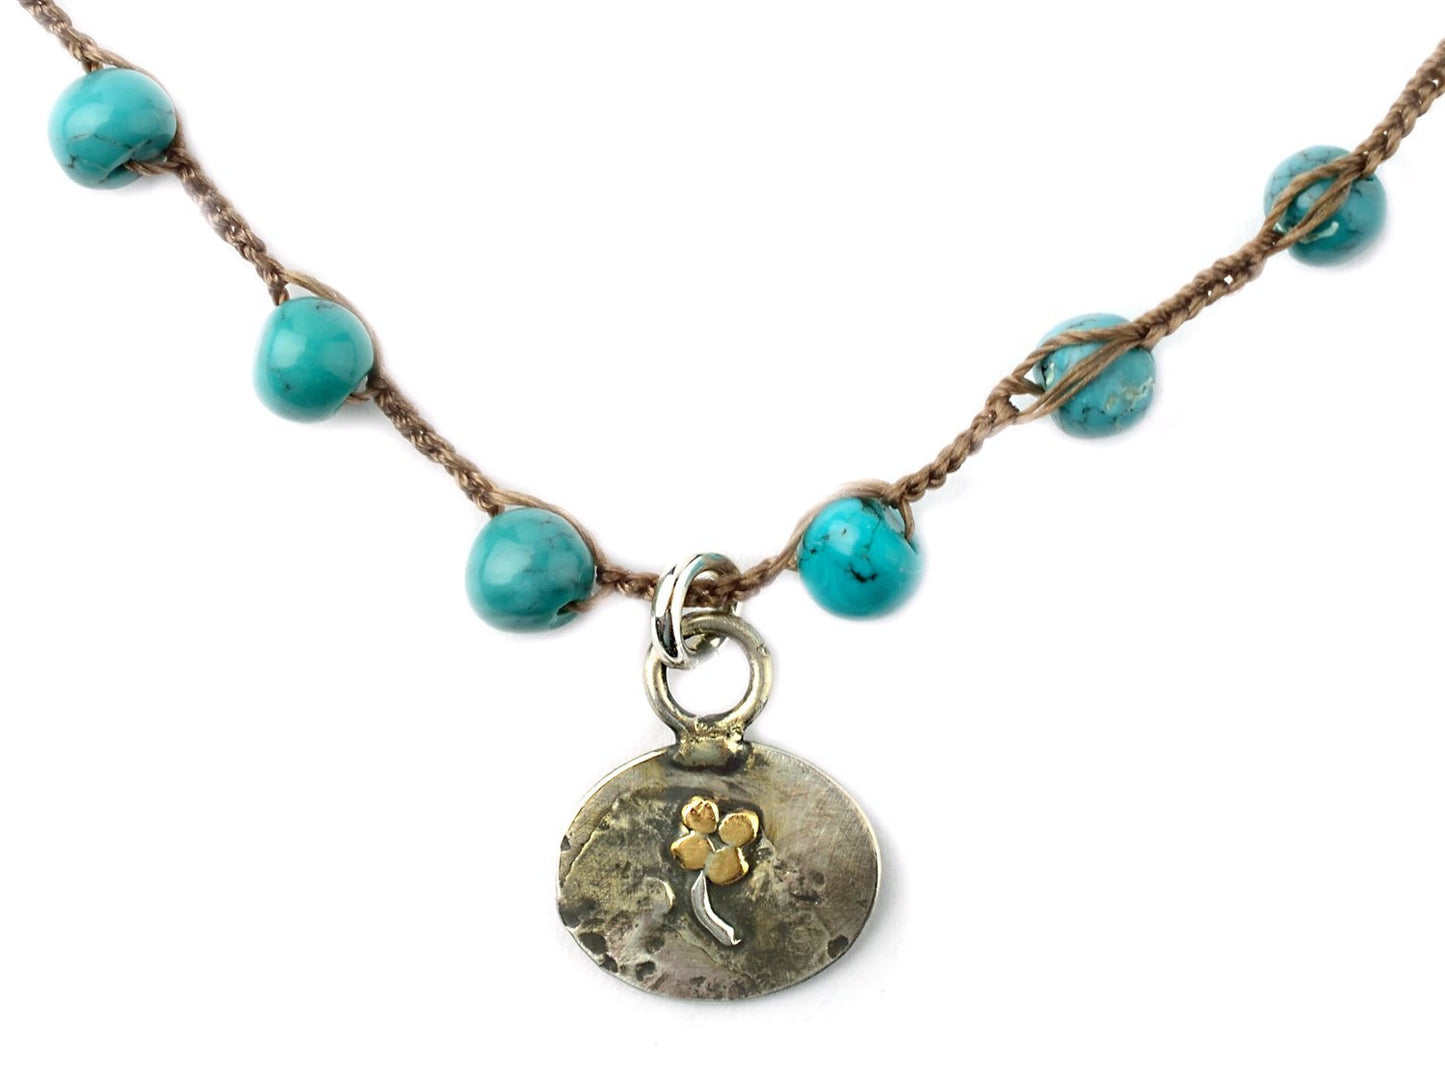 onujewelry.com - Hand-forged Four Leaf Clover brass and sterling silver pendant on hand-crochet semi-precious Turquoise necklace created by Donna Silvestri, On U Jewelry, Richmond, VA